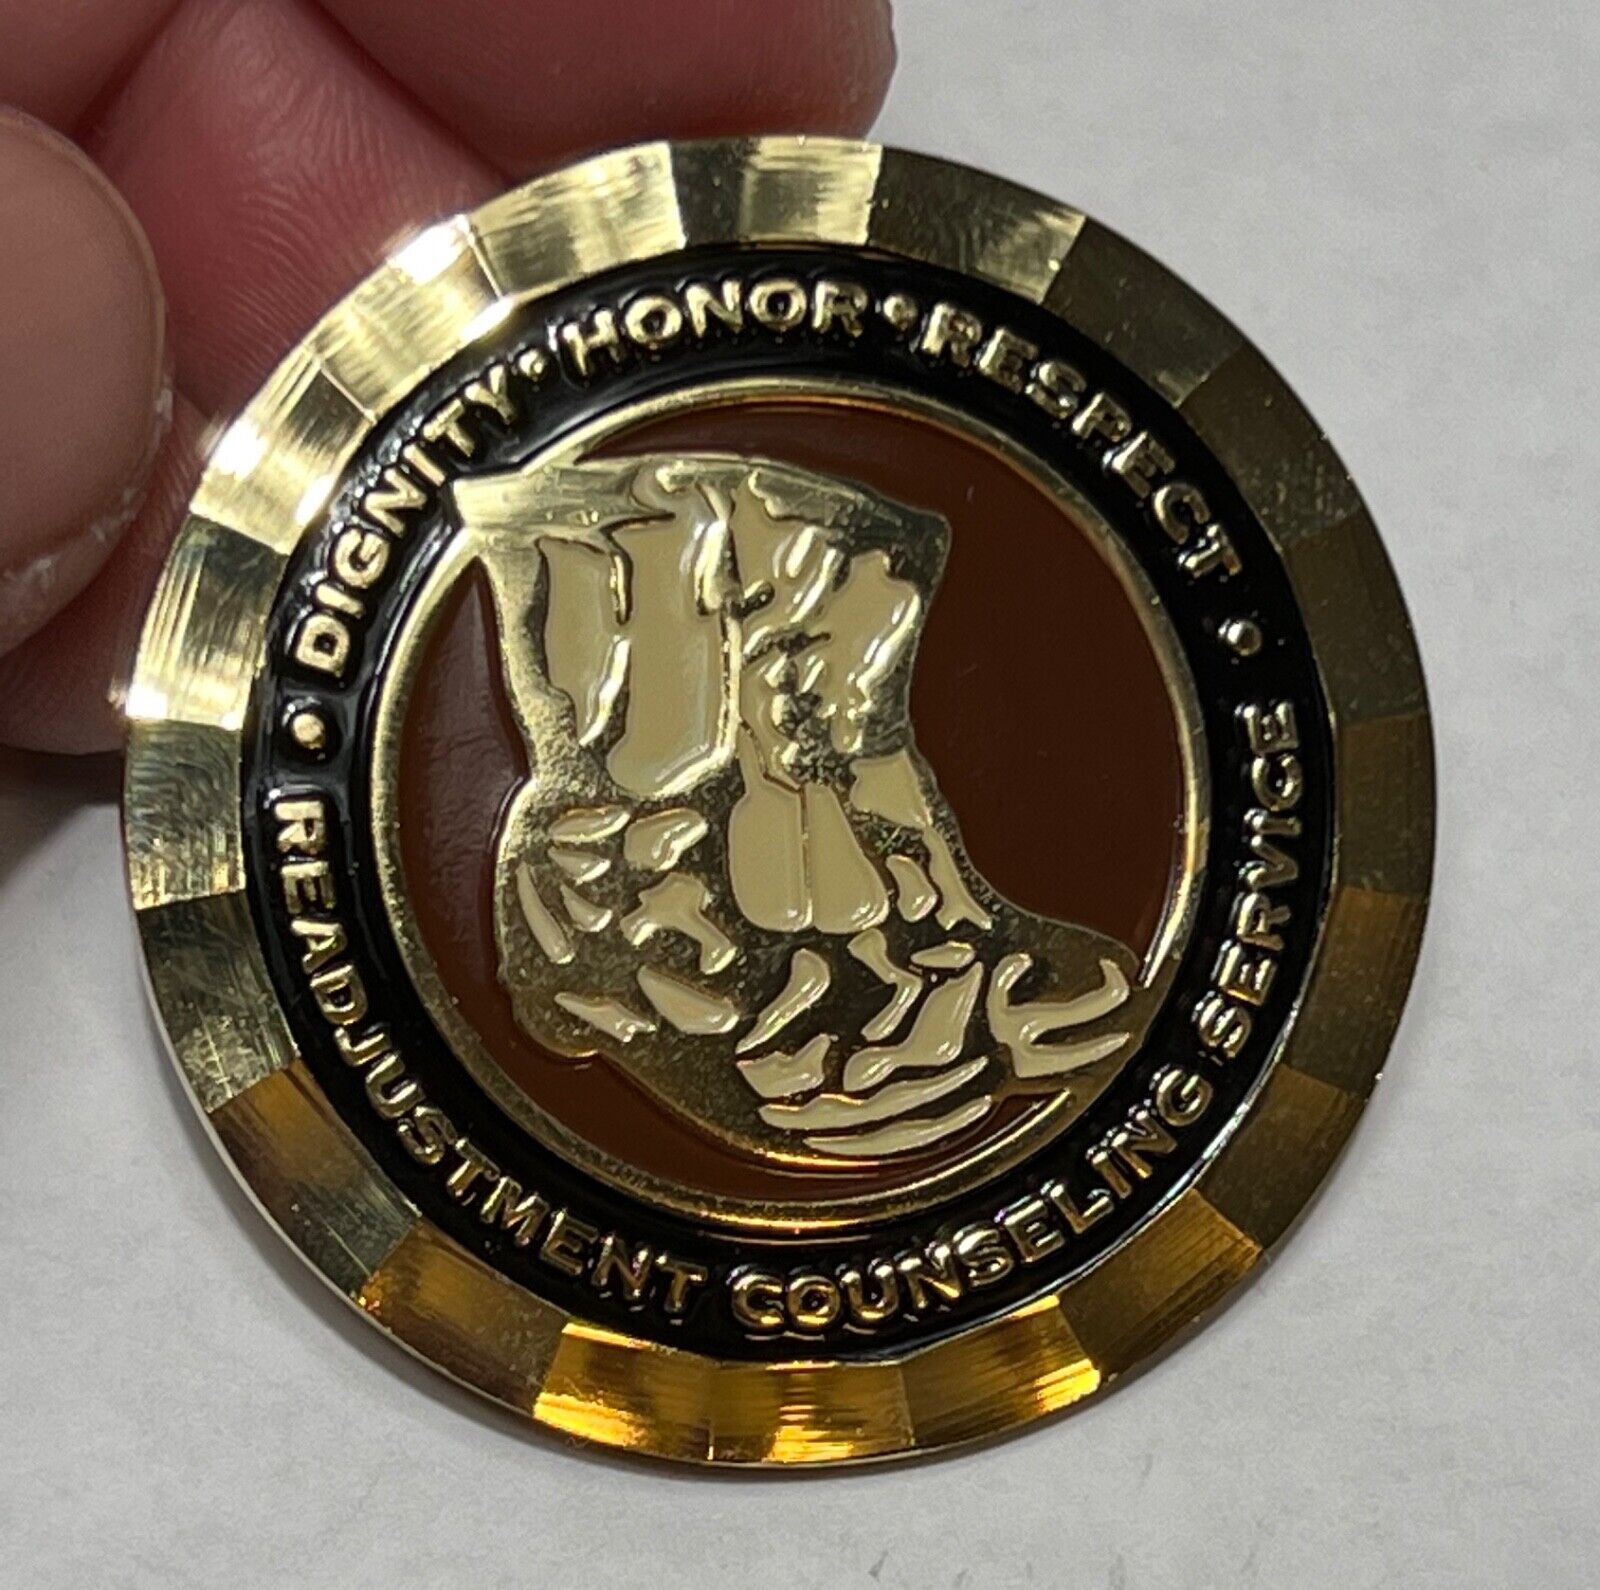 Vet Center Readjustment Counseling Service Dignity Honor Respect Challenge coin